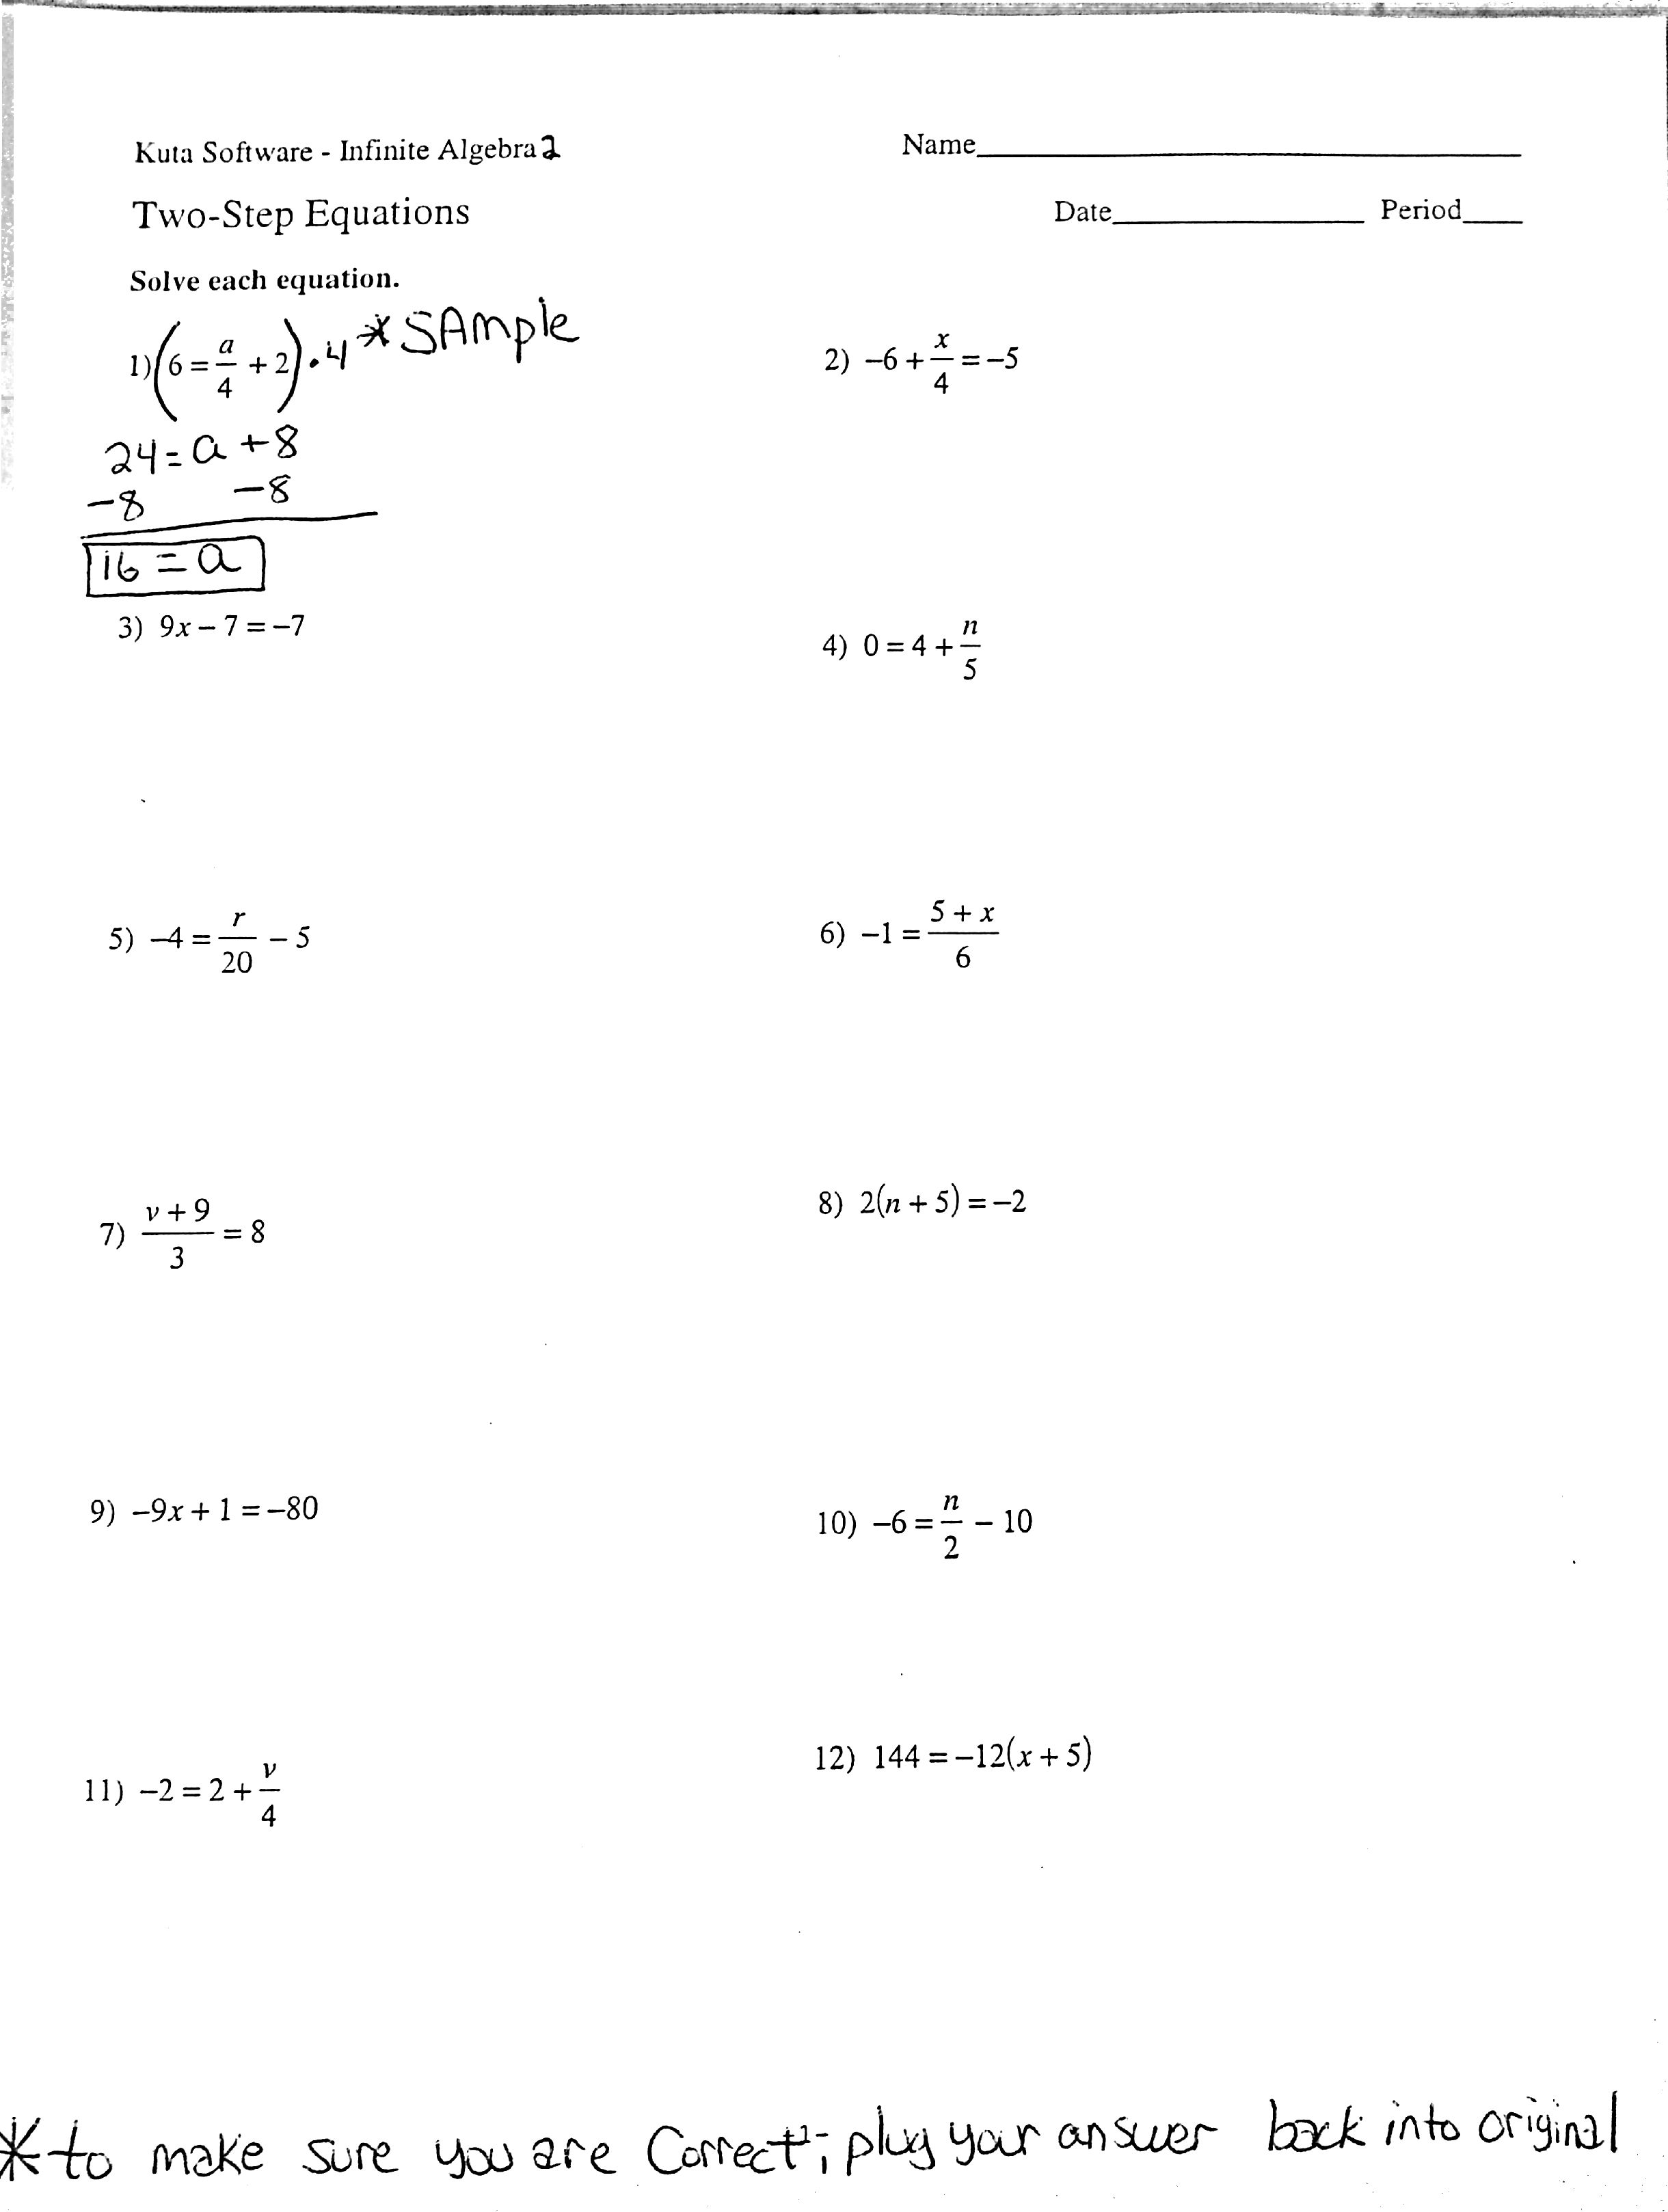 Solving One Step Equations Worksheet Answers